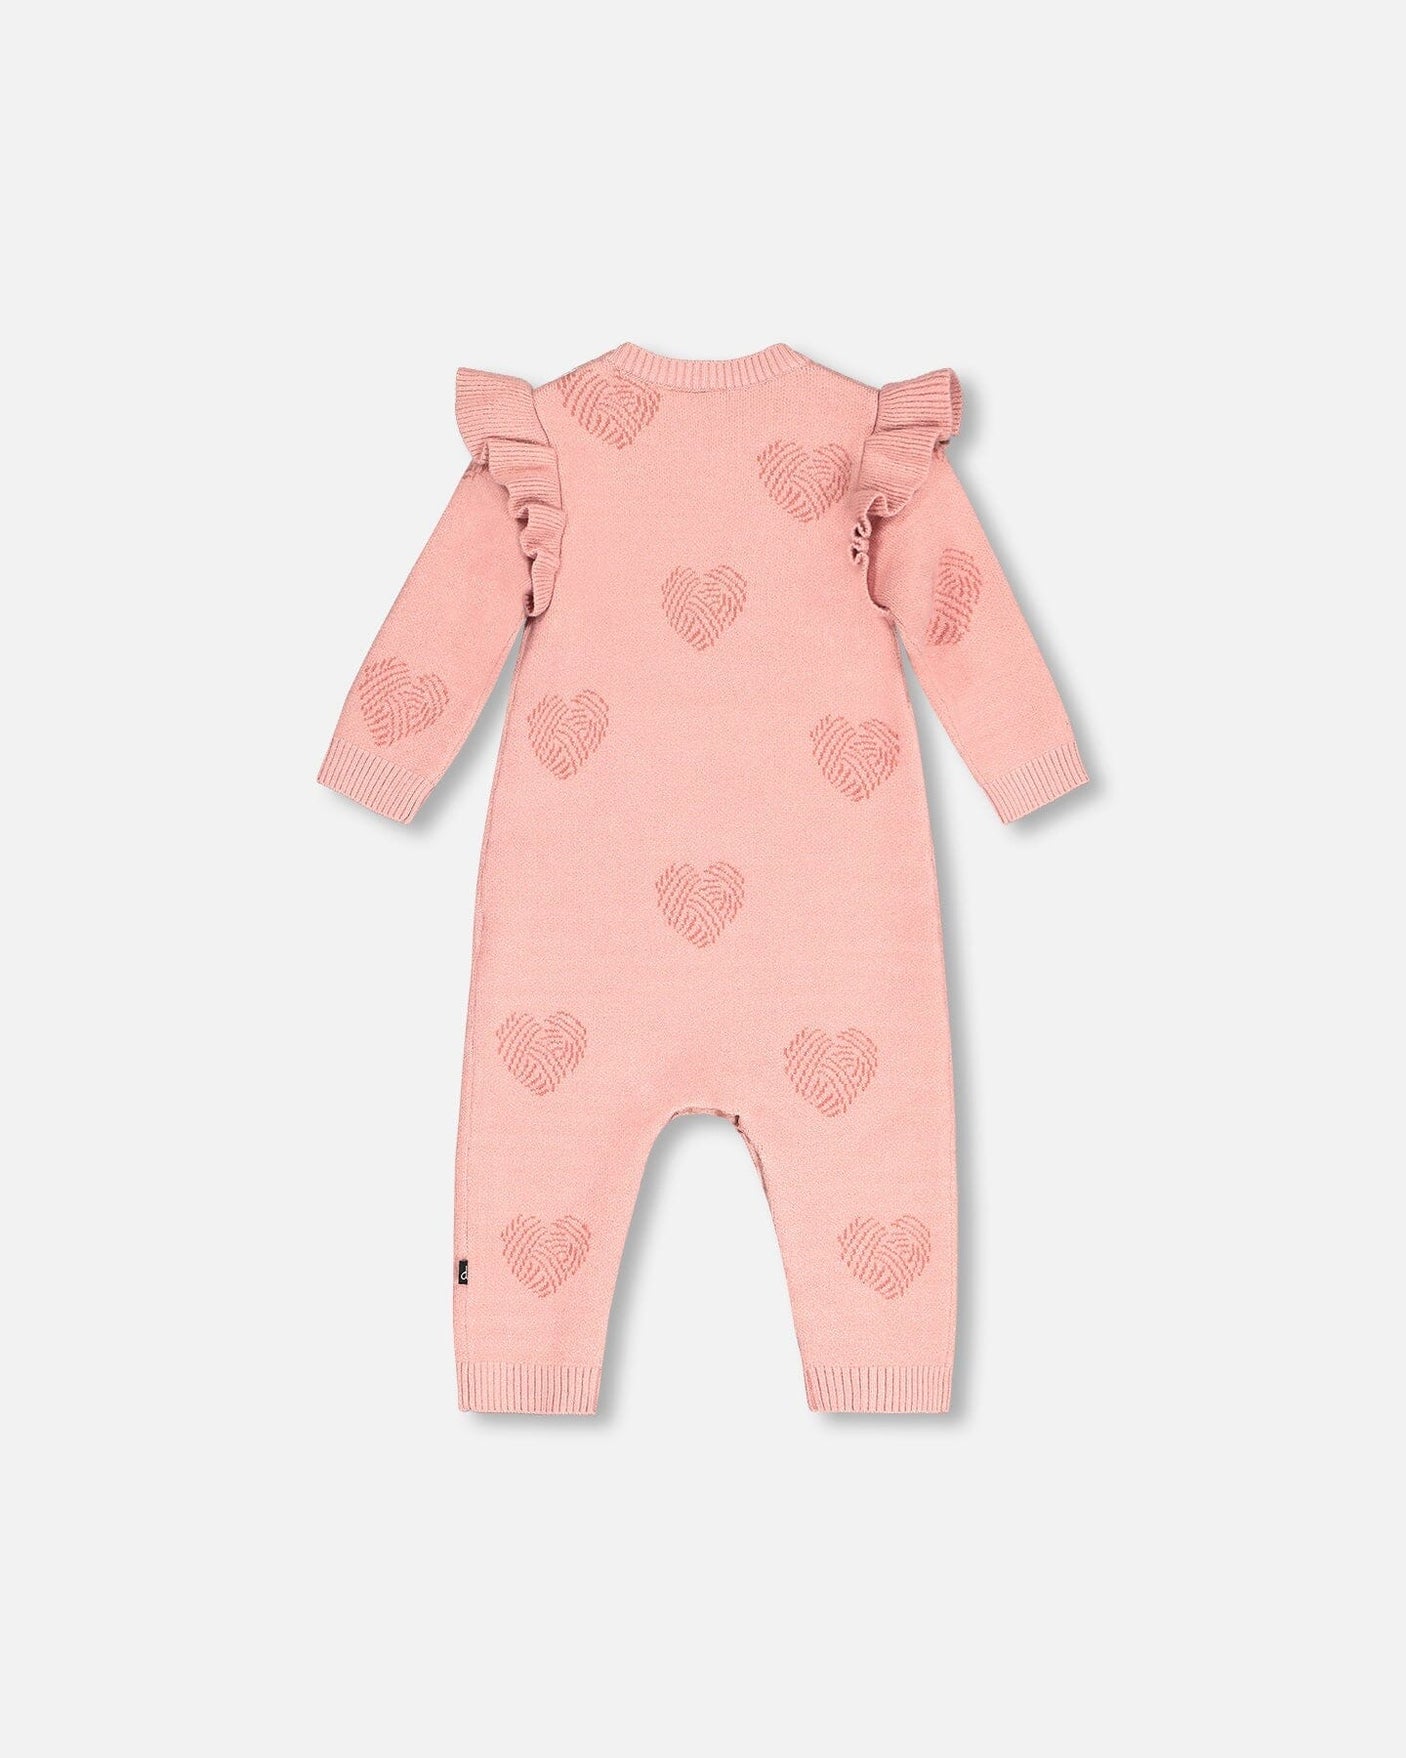 Knitted Jumpsuit With Jacquard Powder Pink Little Heart Of Wool-2